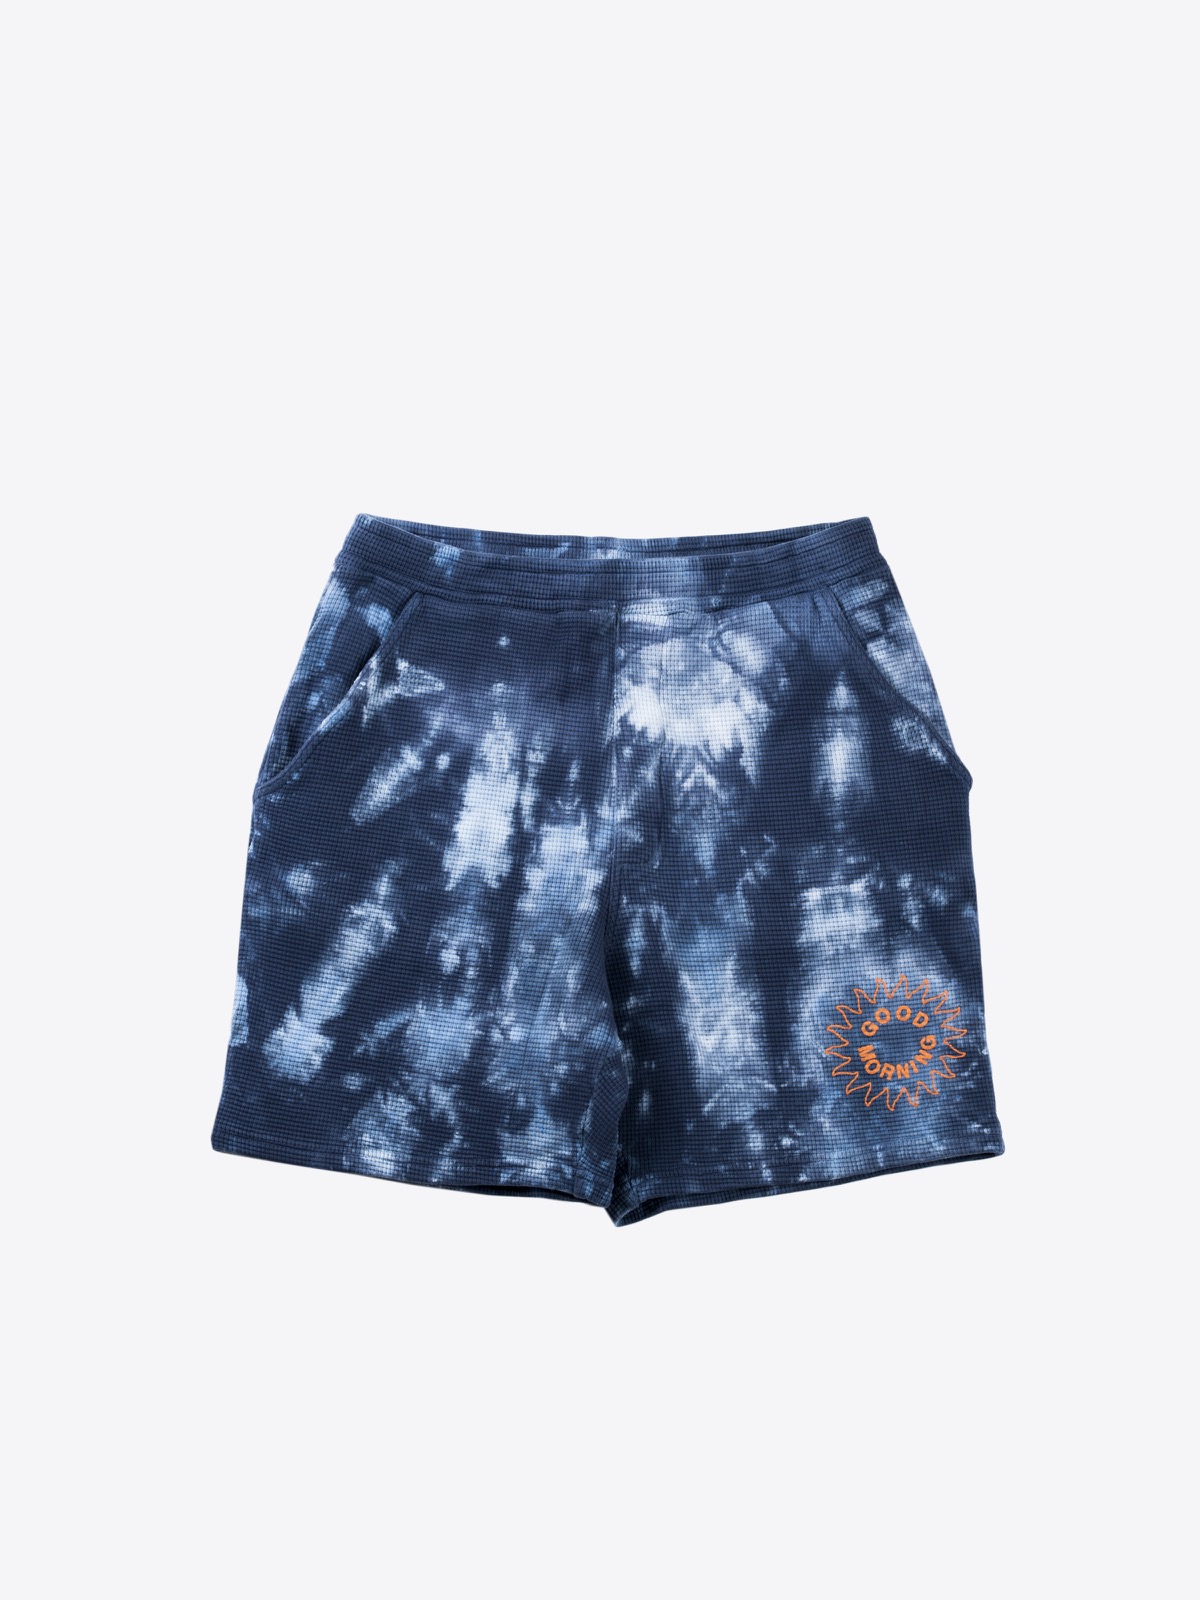 good morning tapes good morning tapes | waffle short 17" blue tie dye